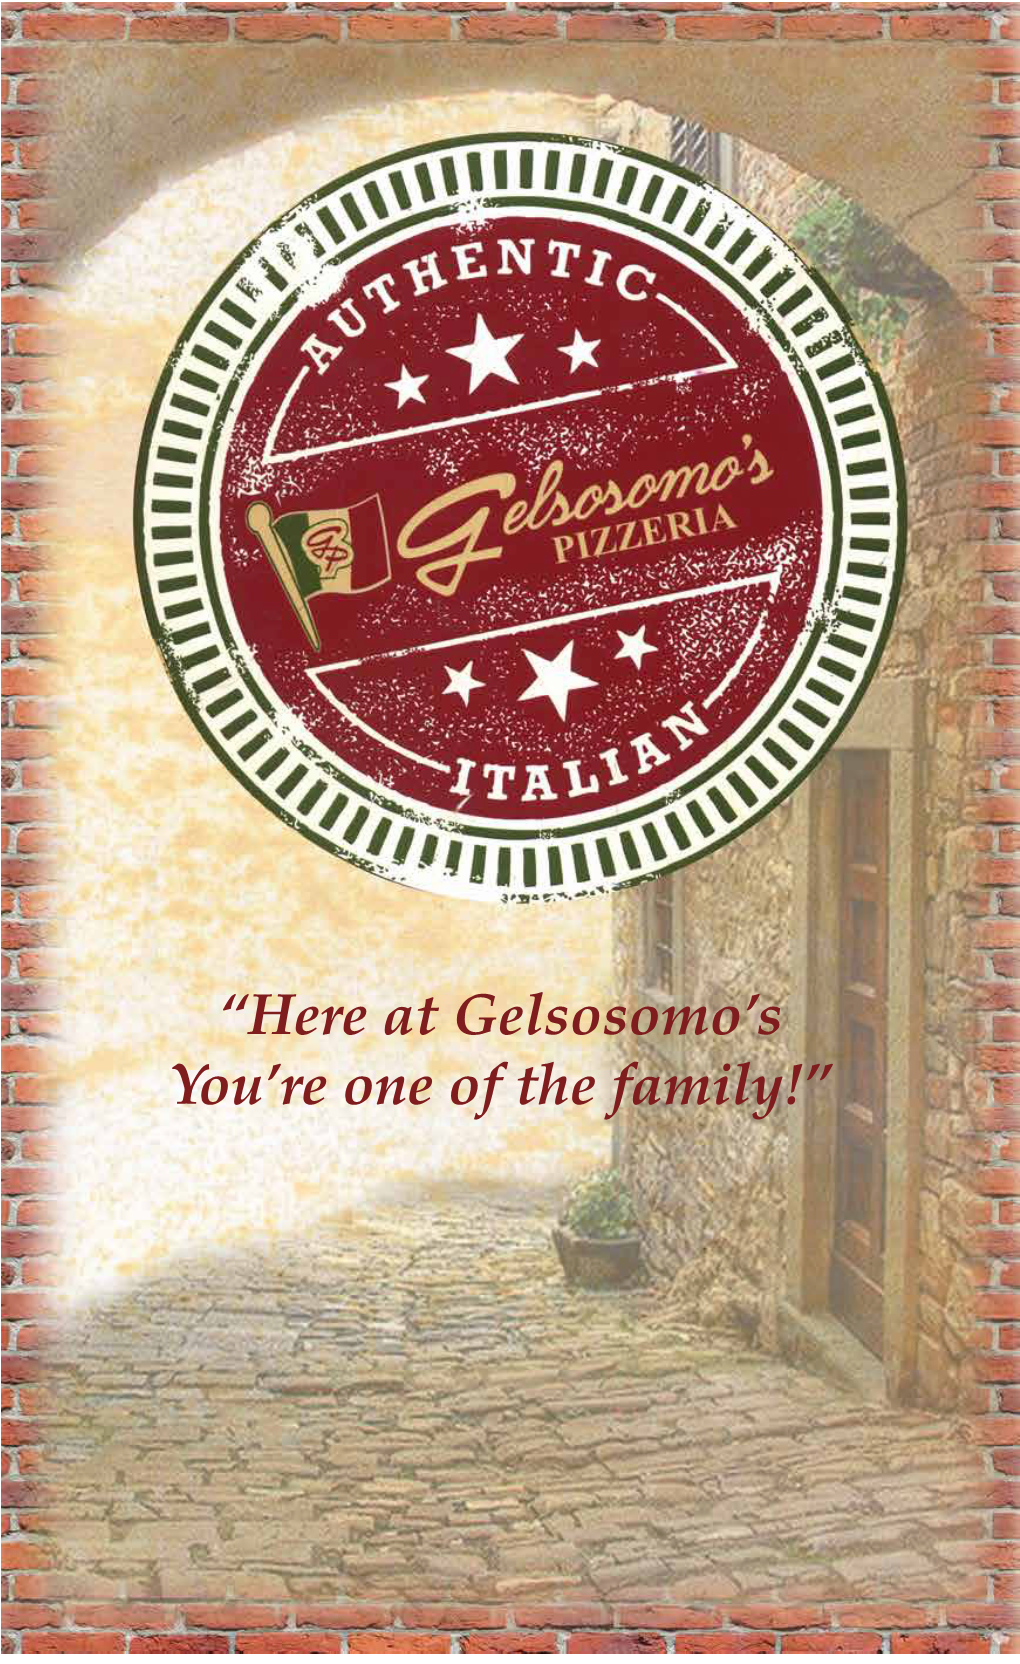 “Here at Gelsosomo's You're One of the Family!”